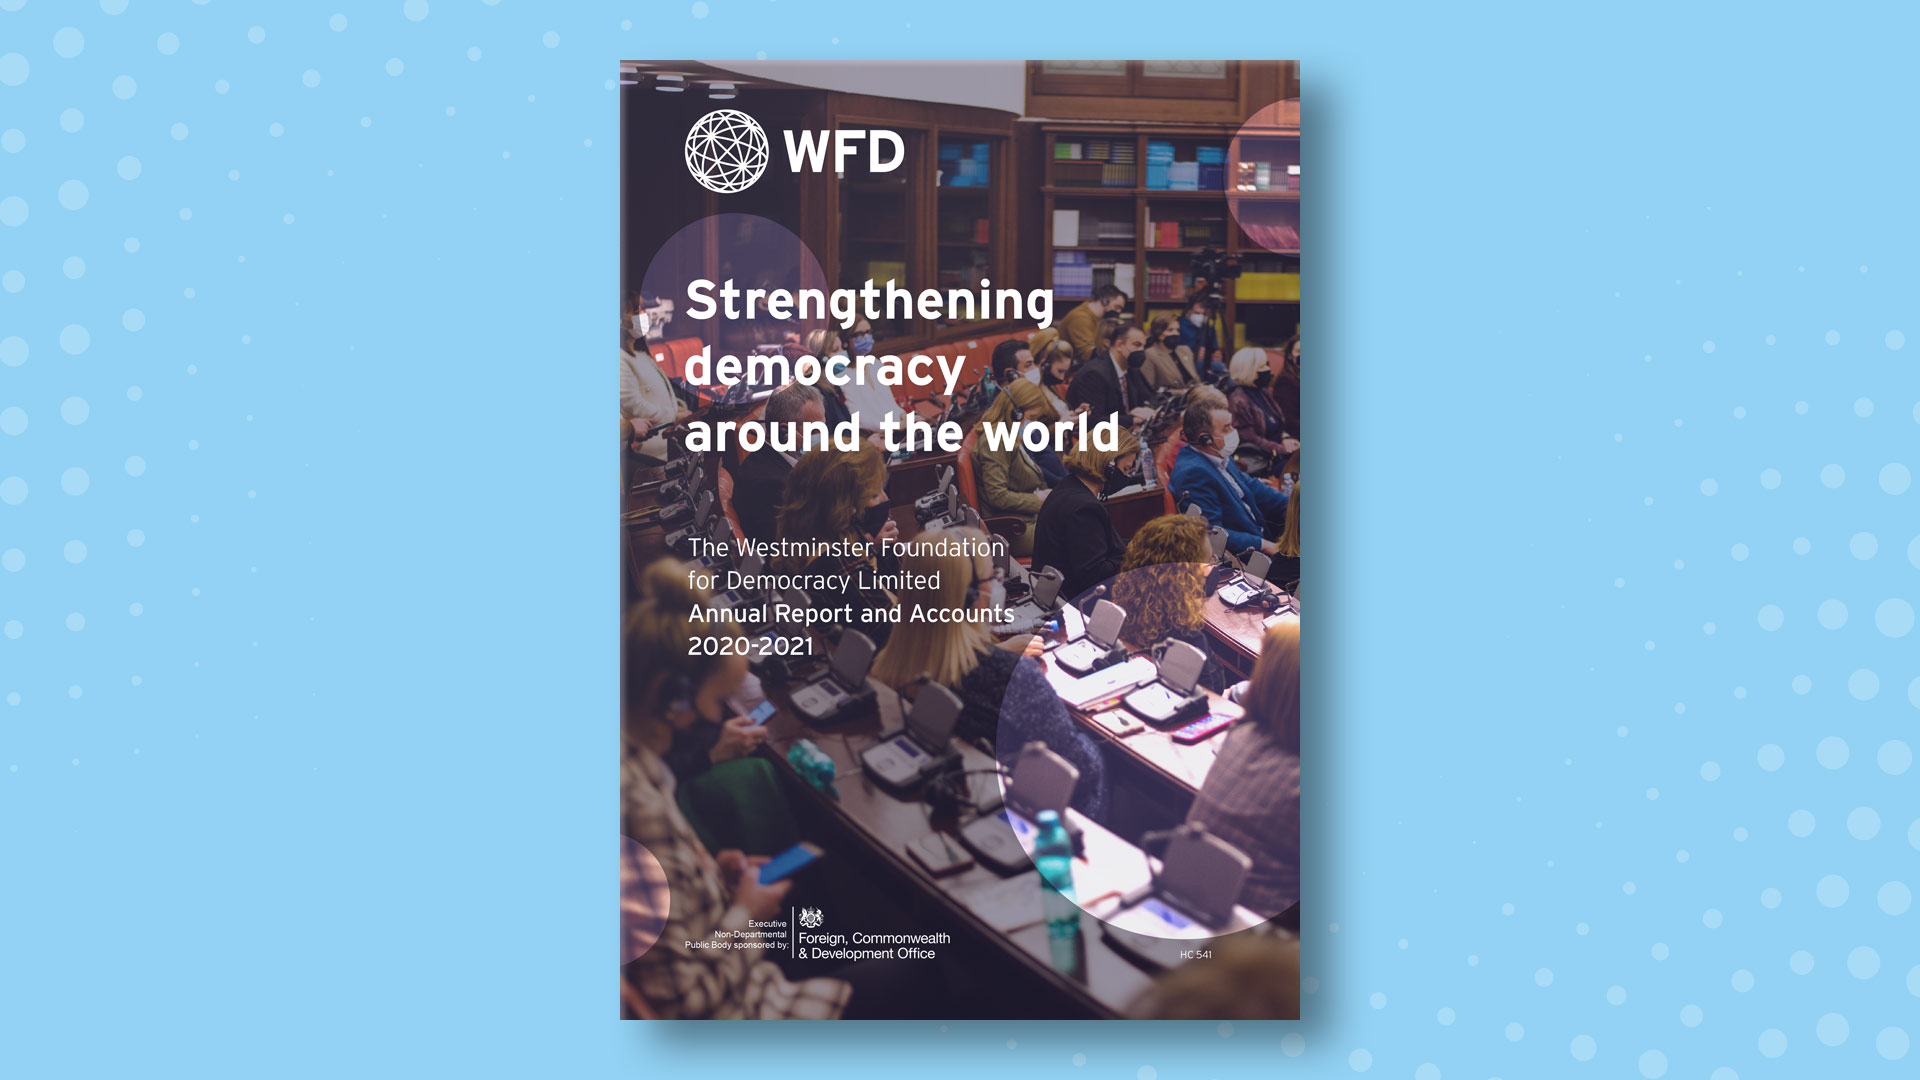 An image of the front cover of WFD's annual report 2020-2021